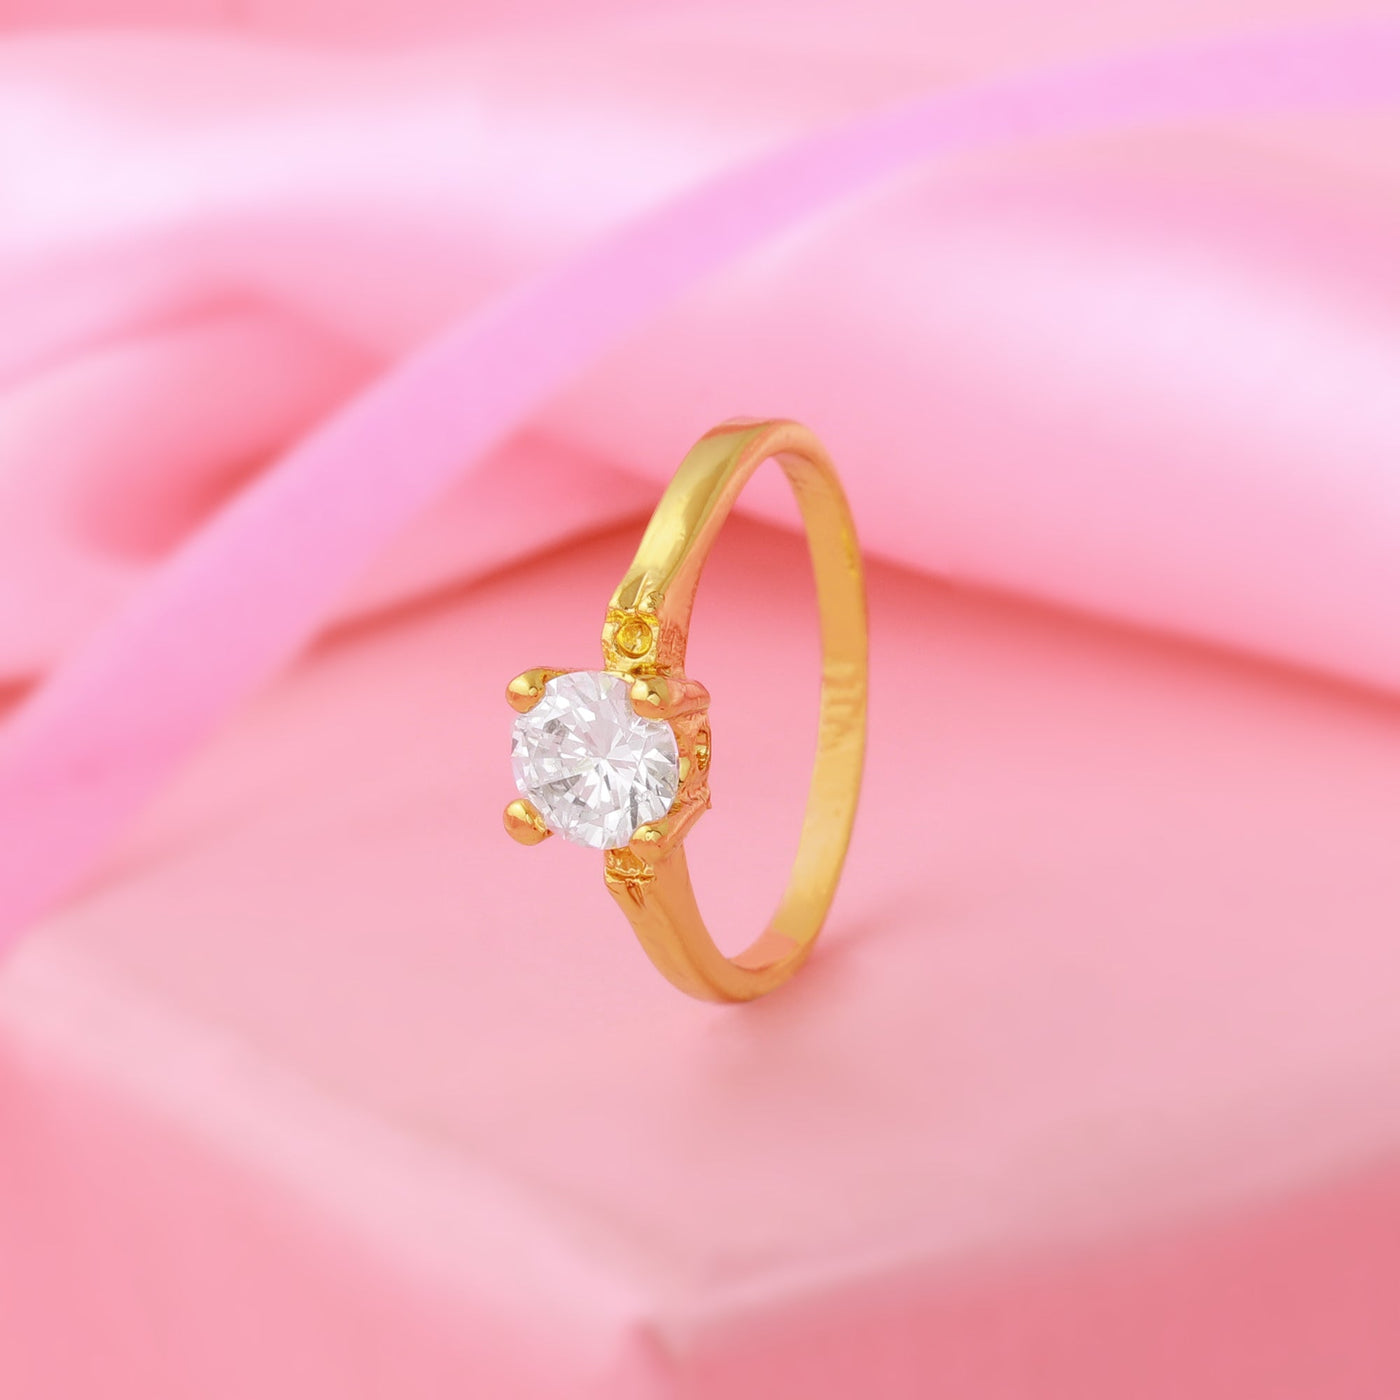 Estele Gold Plated Pretty Ring with Crystal for Women